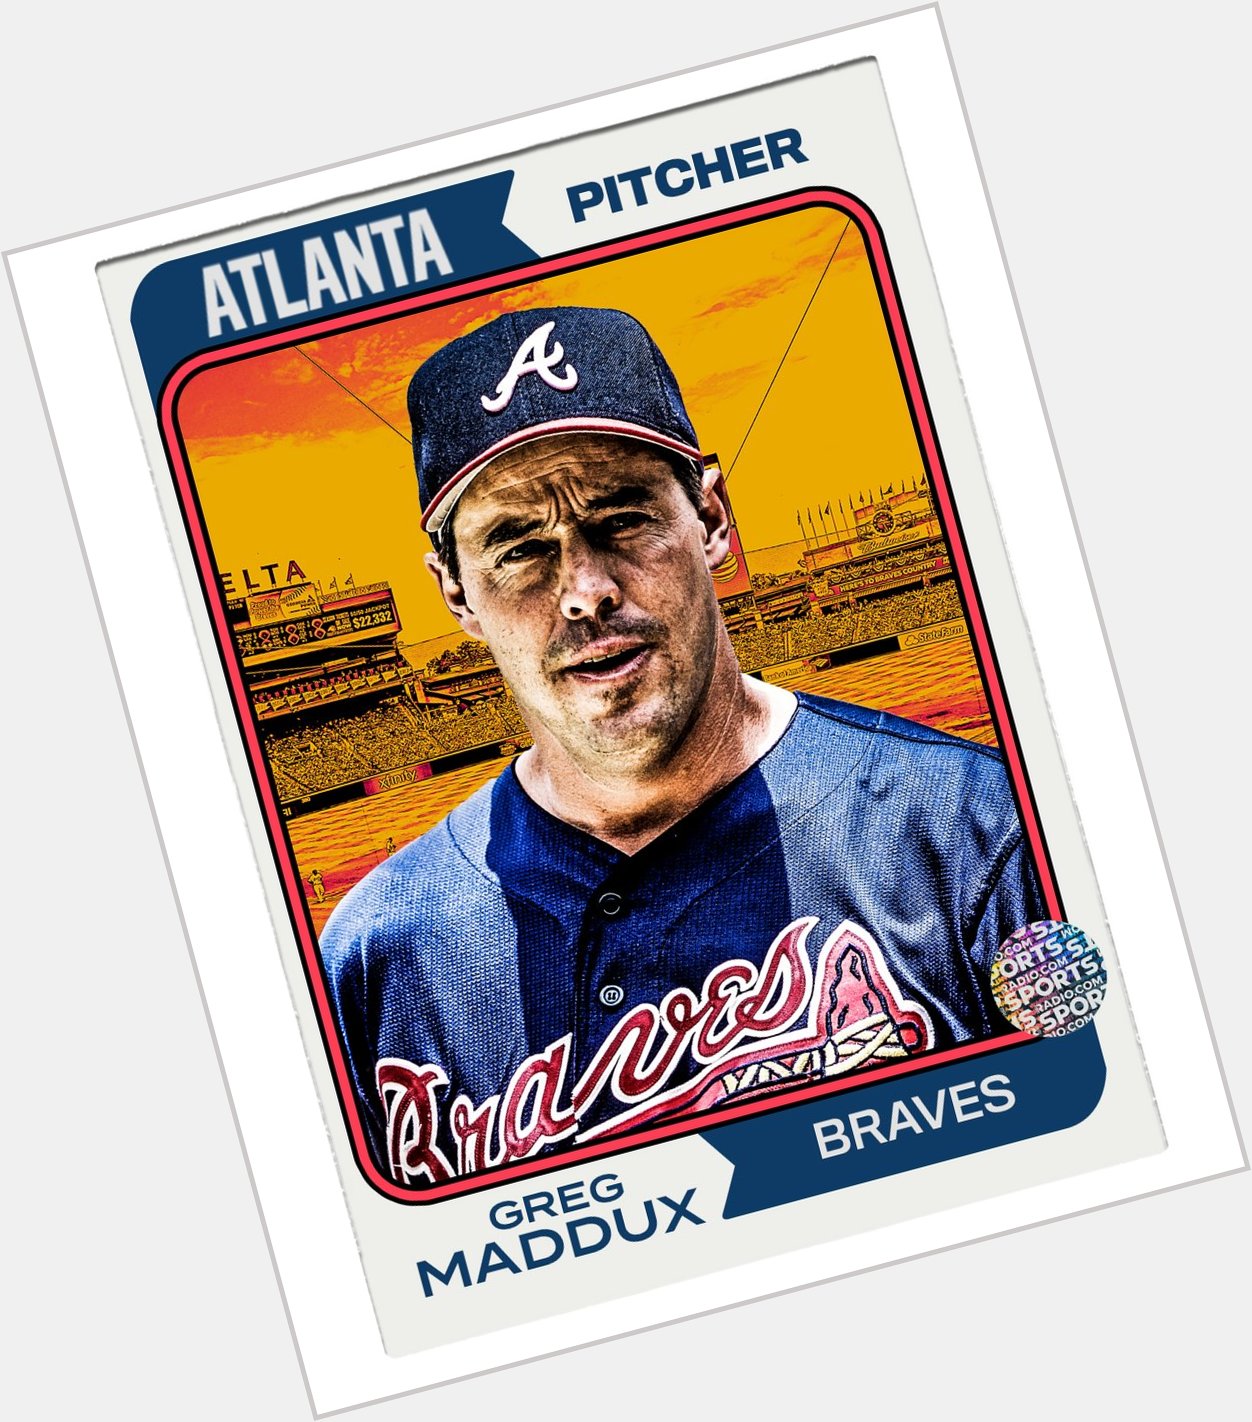 Join us in wishing Greg Maddux a Happy Birthday! 